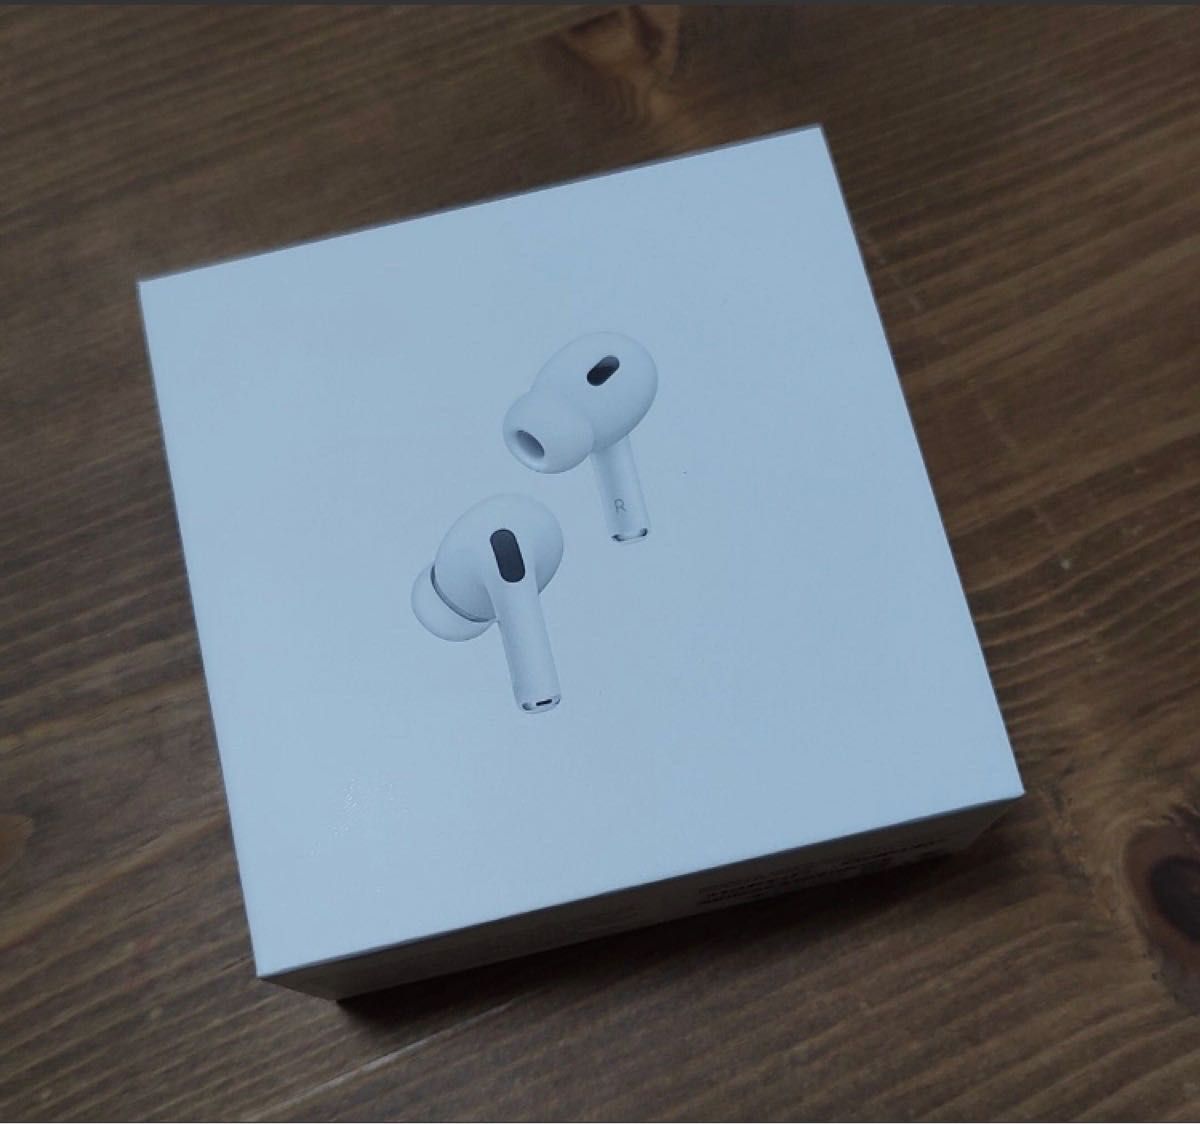 AirPods Pro 第2世代 (新品未使用)｜PayPayフリマ